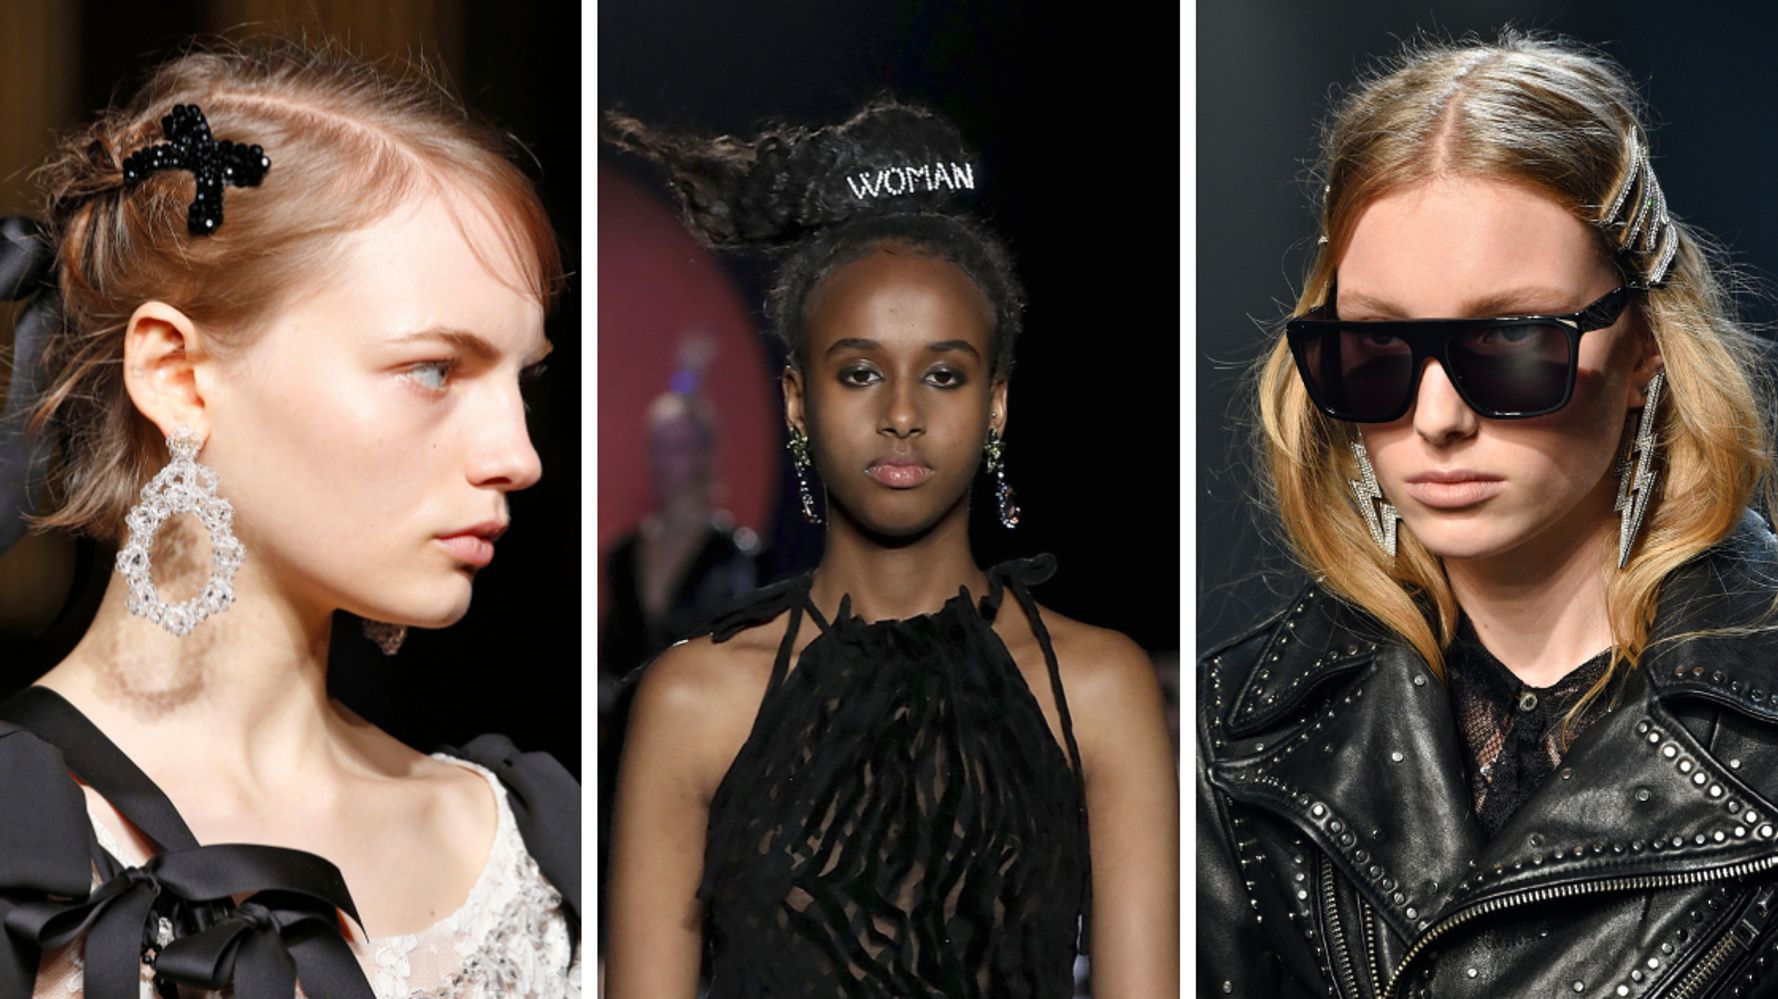 Fashion trend: Why the barrette hair clip is this season's must